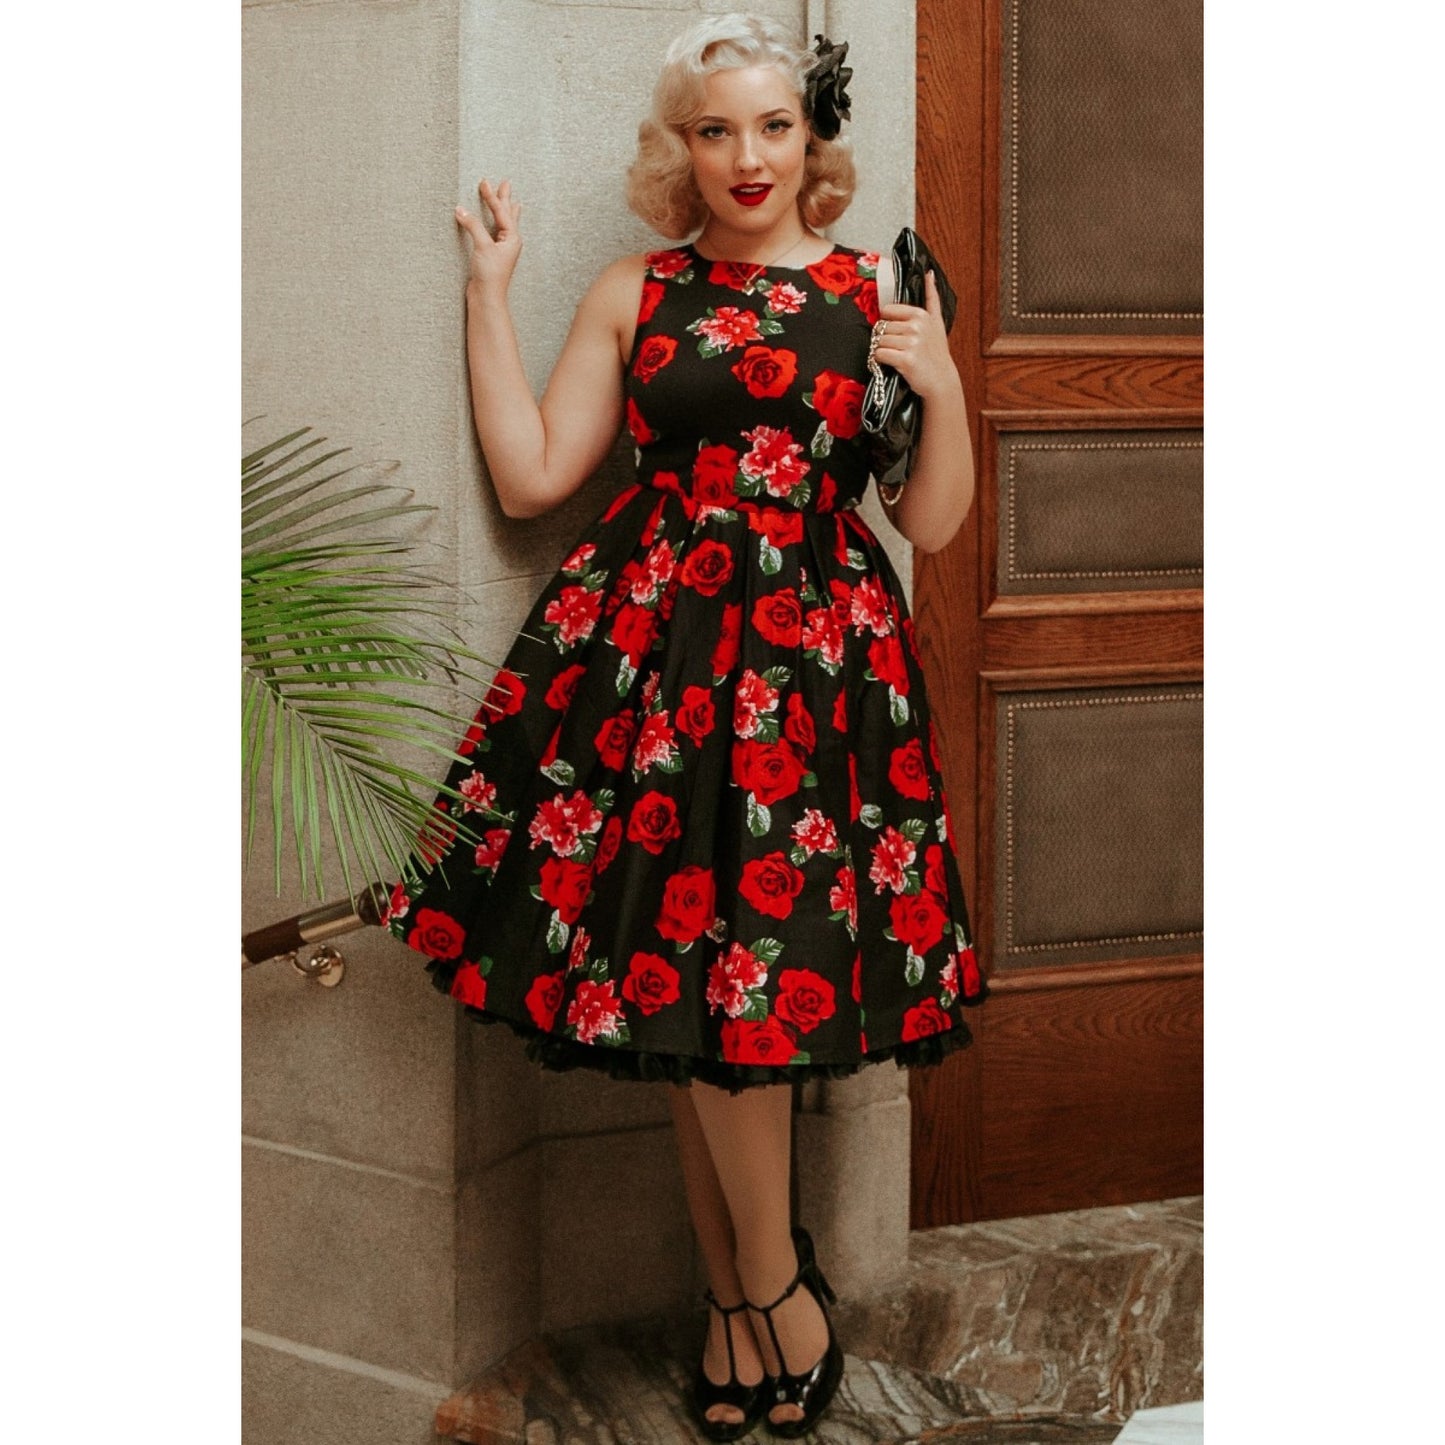 Blonde woman wearing red lipstick standing in a stone hallway wearing the Annie red roses dress with a black petticoat underneath and black T Bar high heels